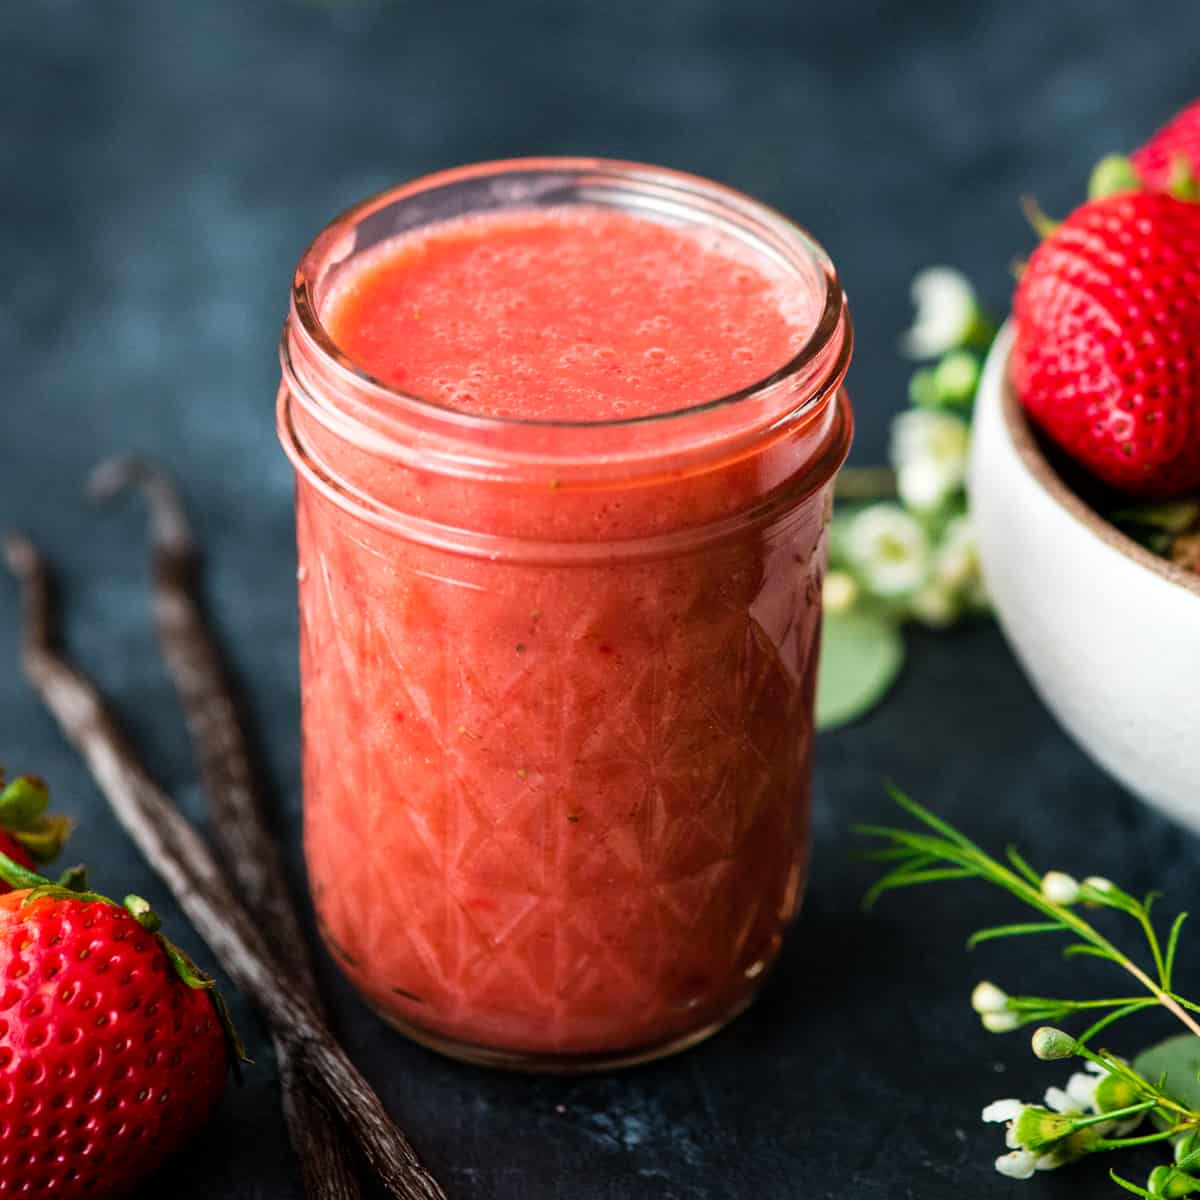 Front view of a glass jar full of Strawberry Sauce recipe